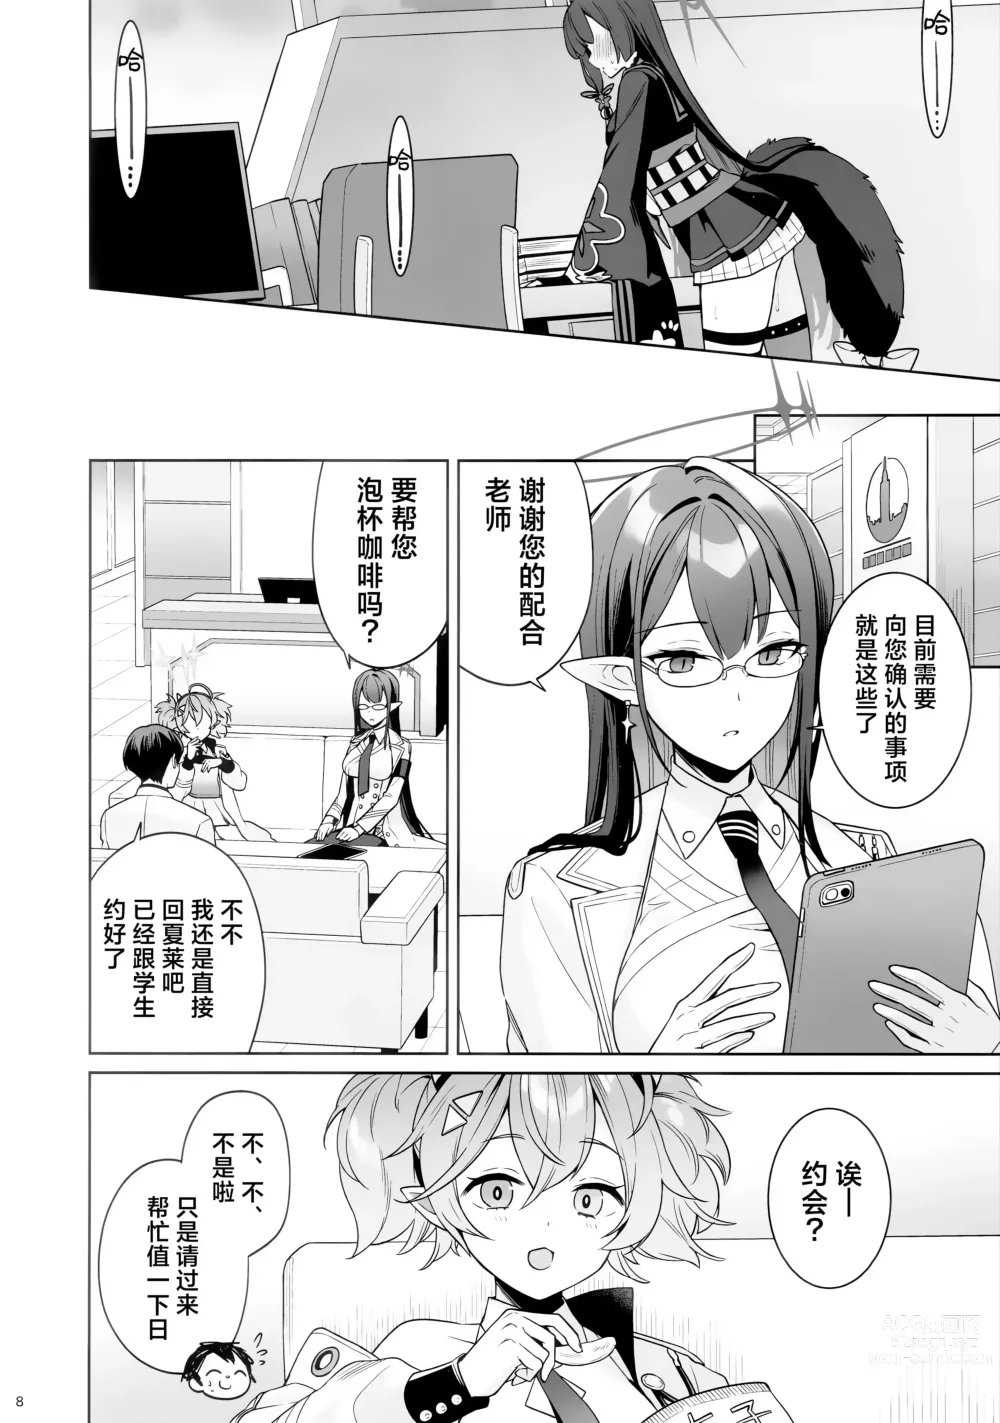 Page 7 of doujinshi 纯情·恋情·发情狐